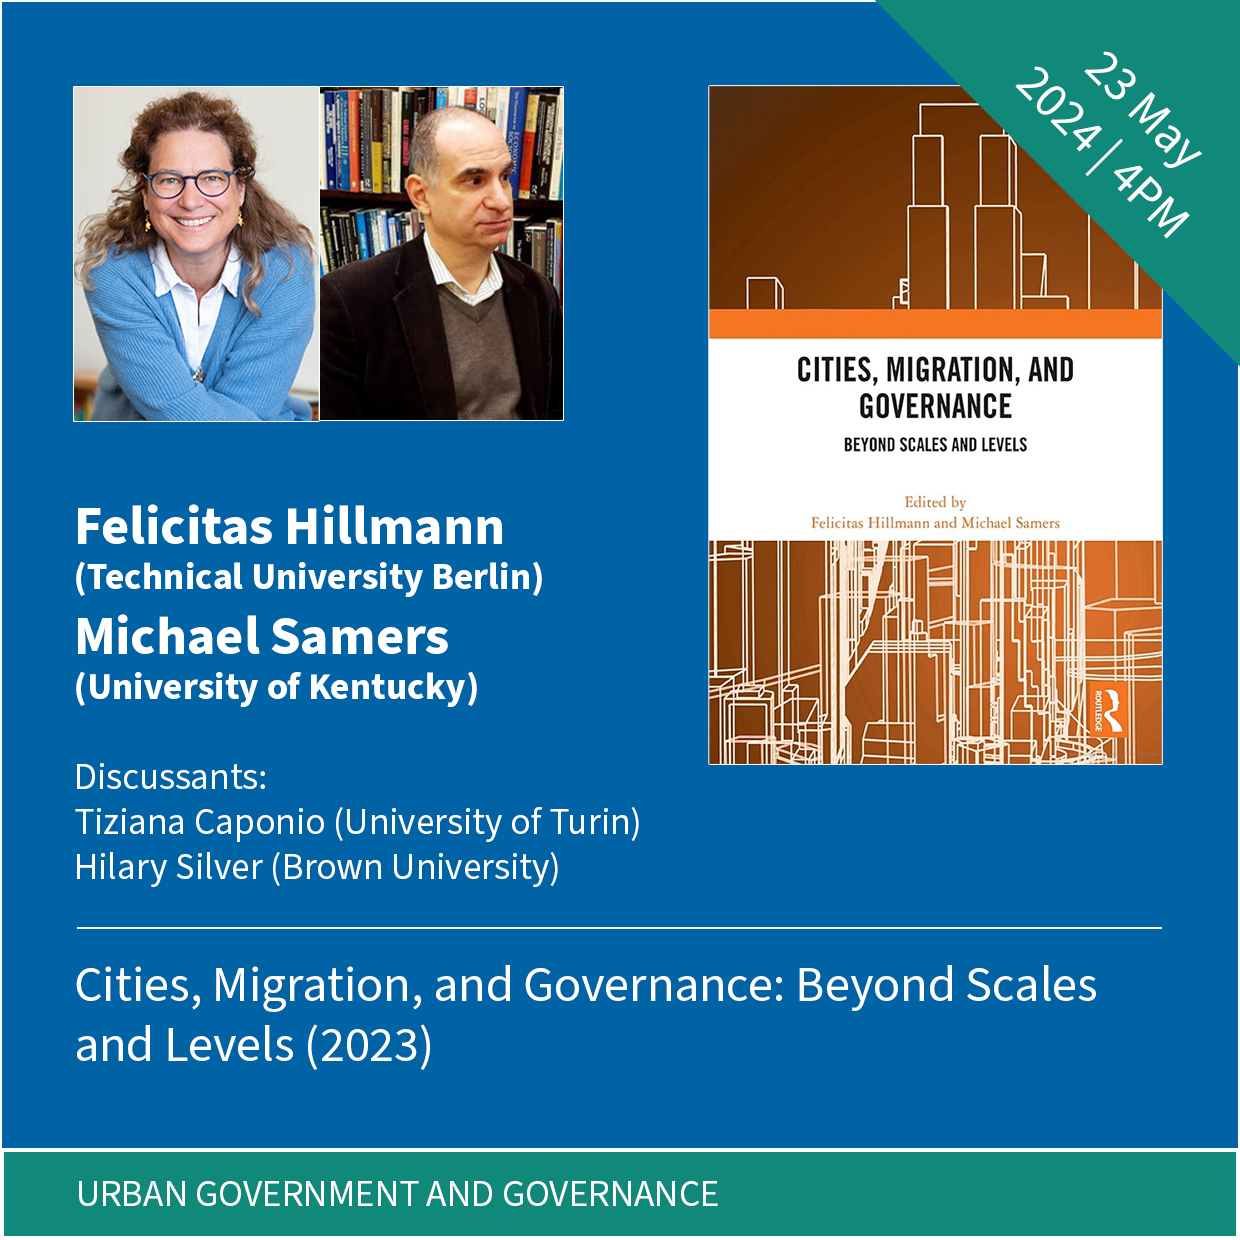 Research Area: Urban Government and Governance